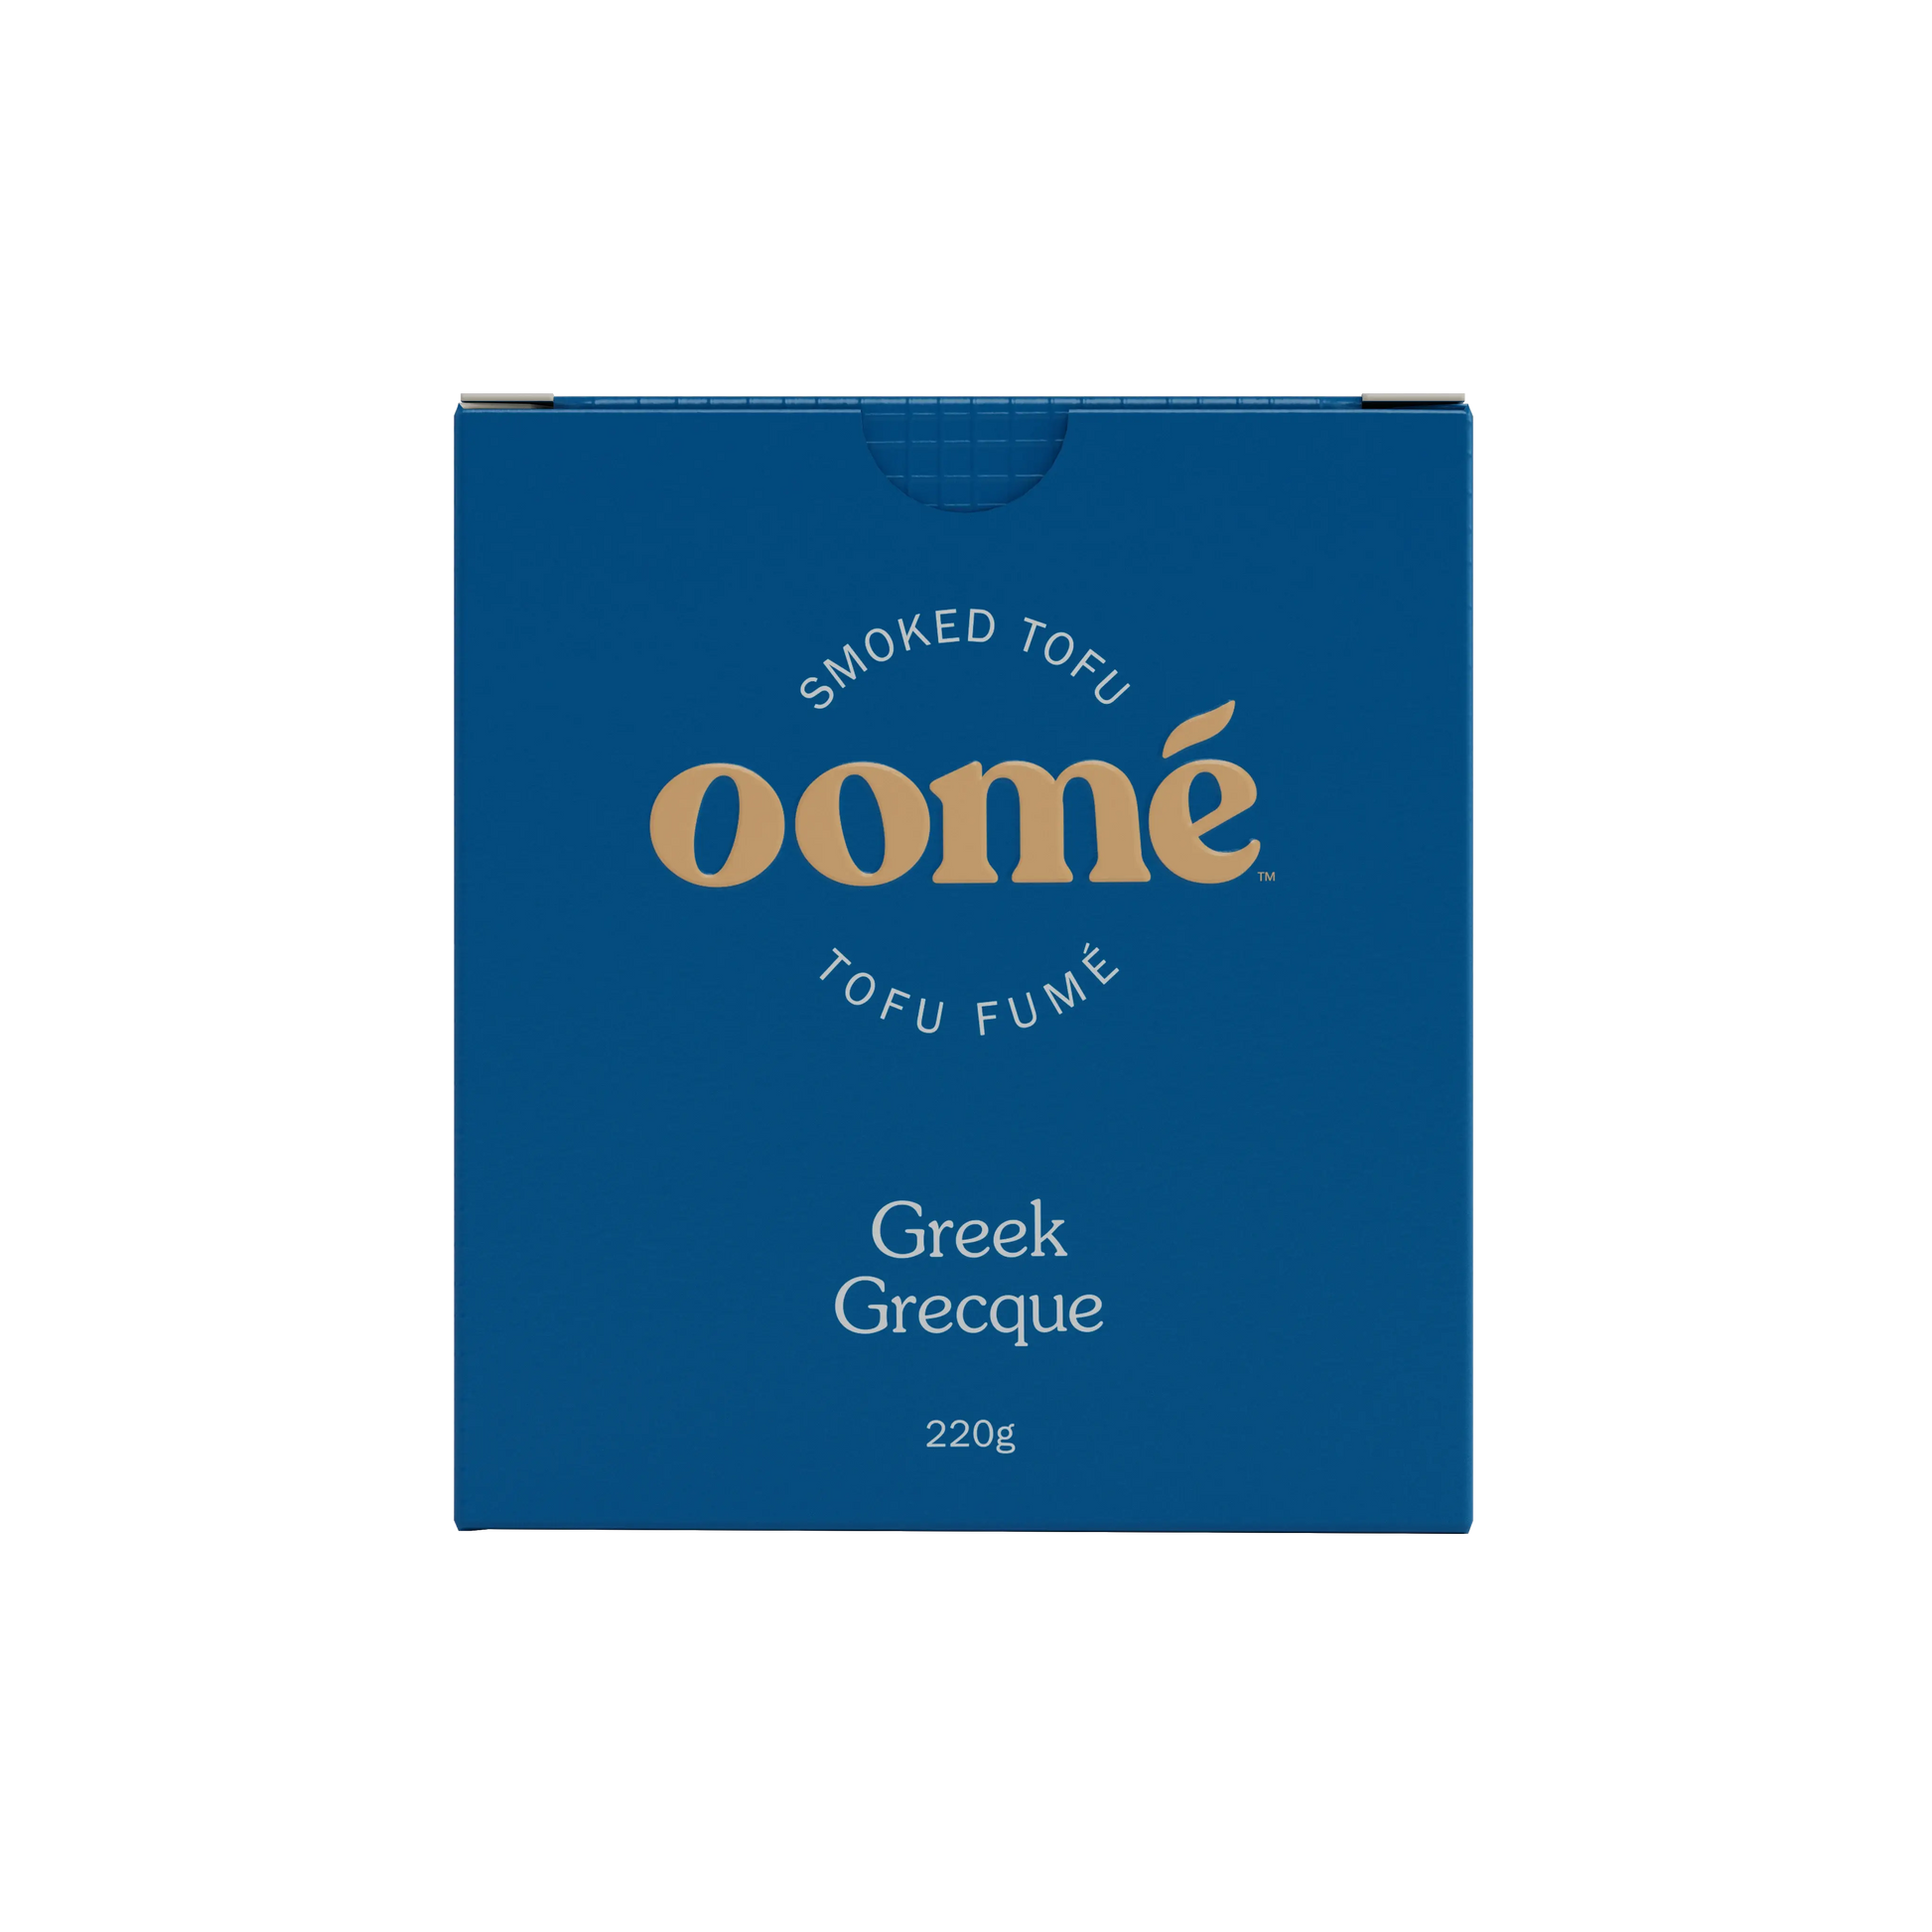 oome smoked tofu greek flavour packaging front of pack